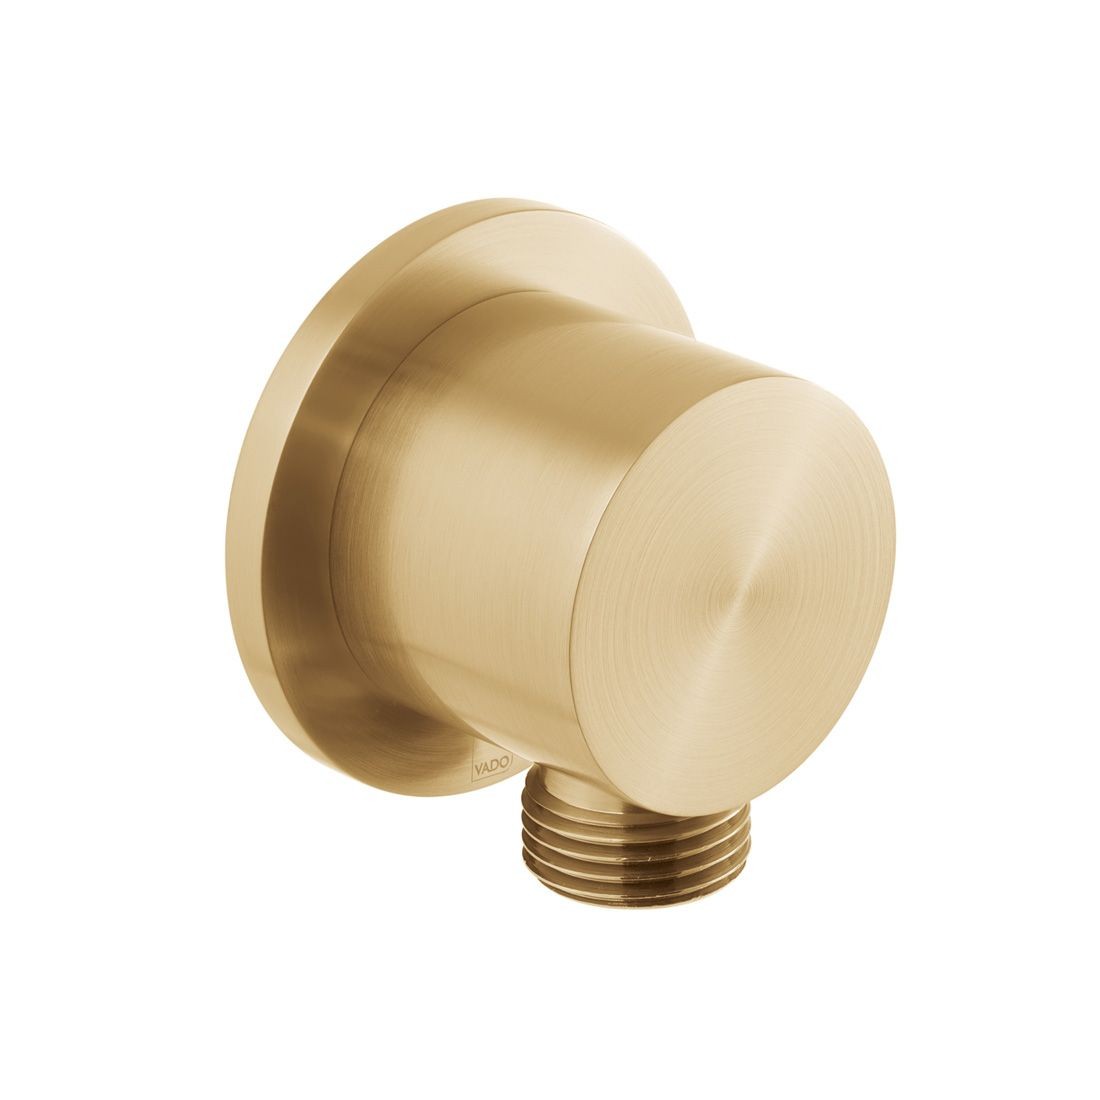 Individual by Vado Wall Outlet 55mm Round Brushed Gold [IND-OUTLET/RO2-BRG]